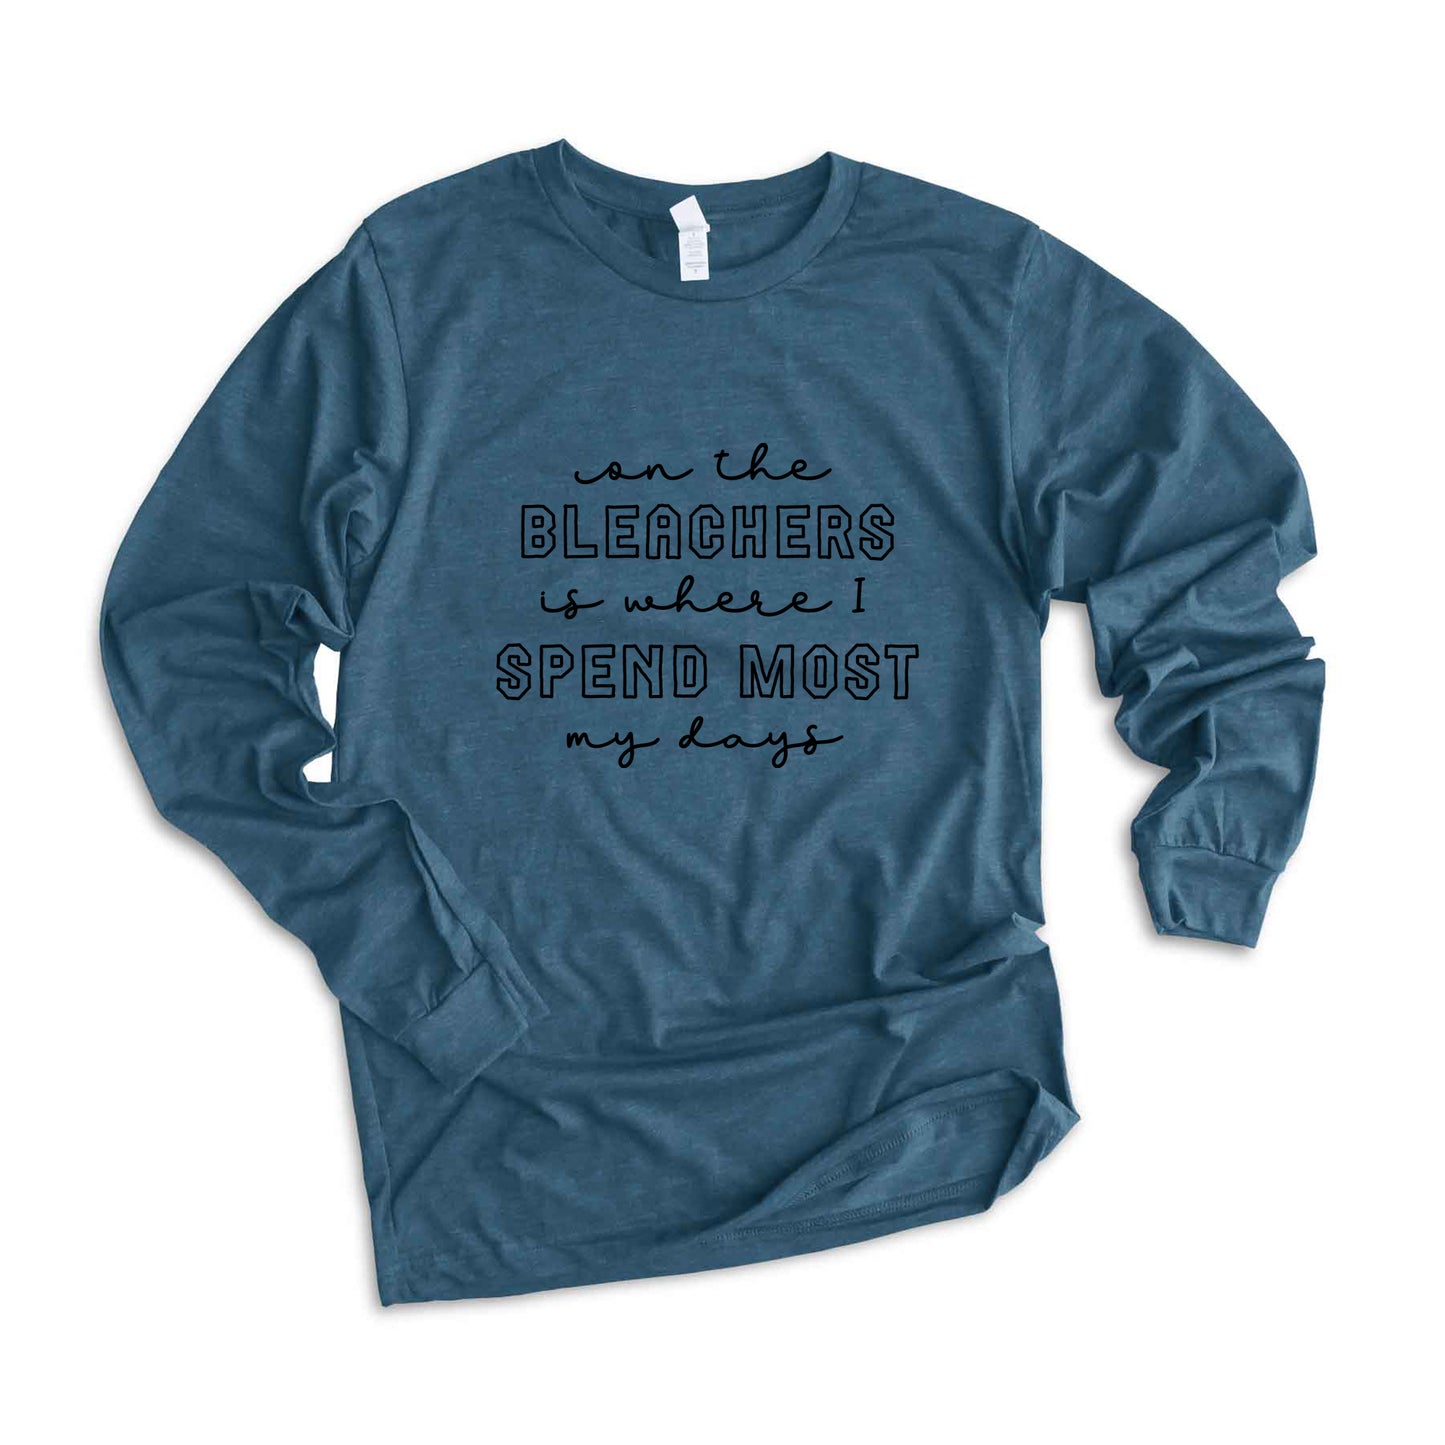 On The Bleachers Is Where I Spend Most My Days | Long Sleeve Graphic Tee